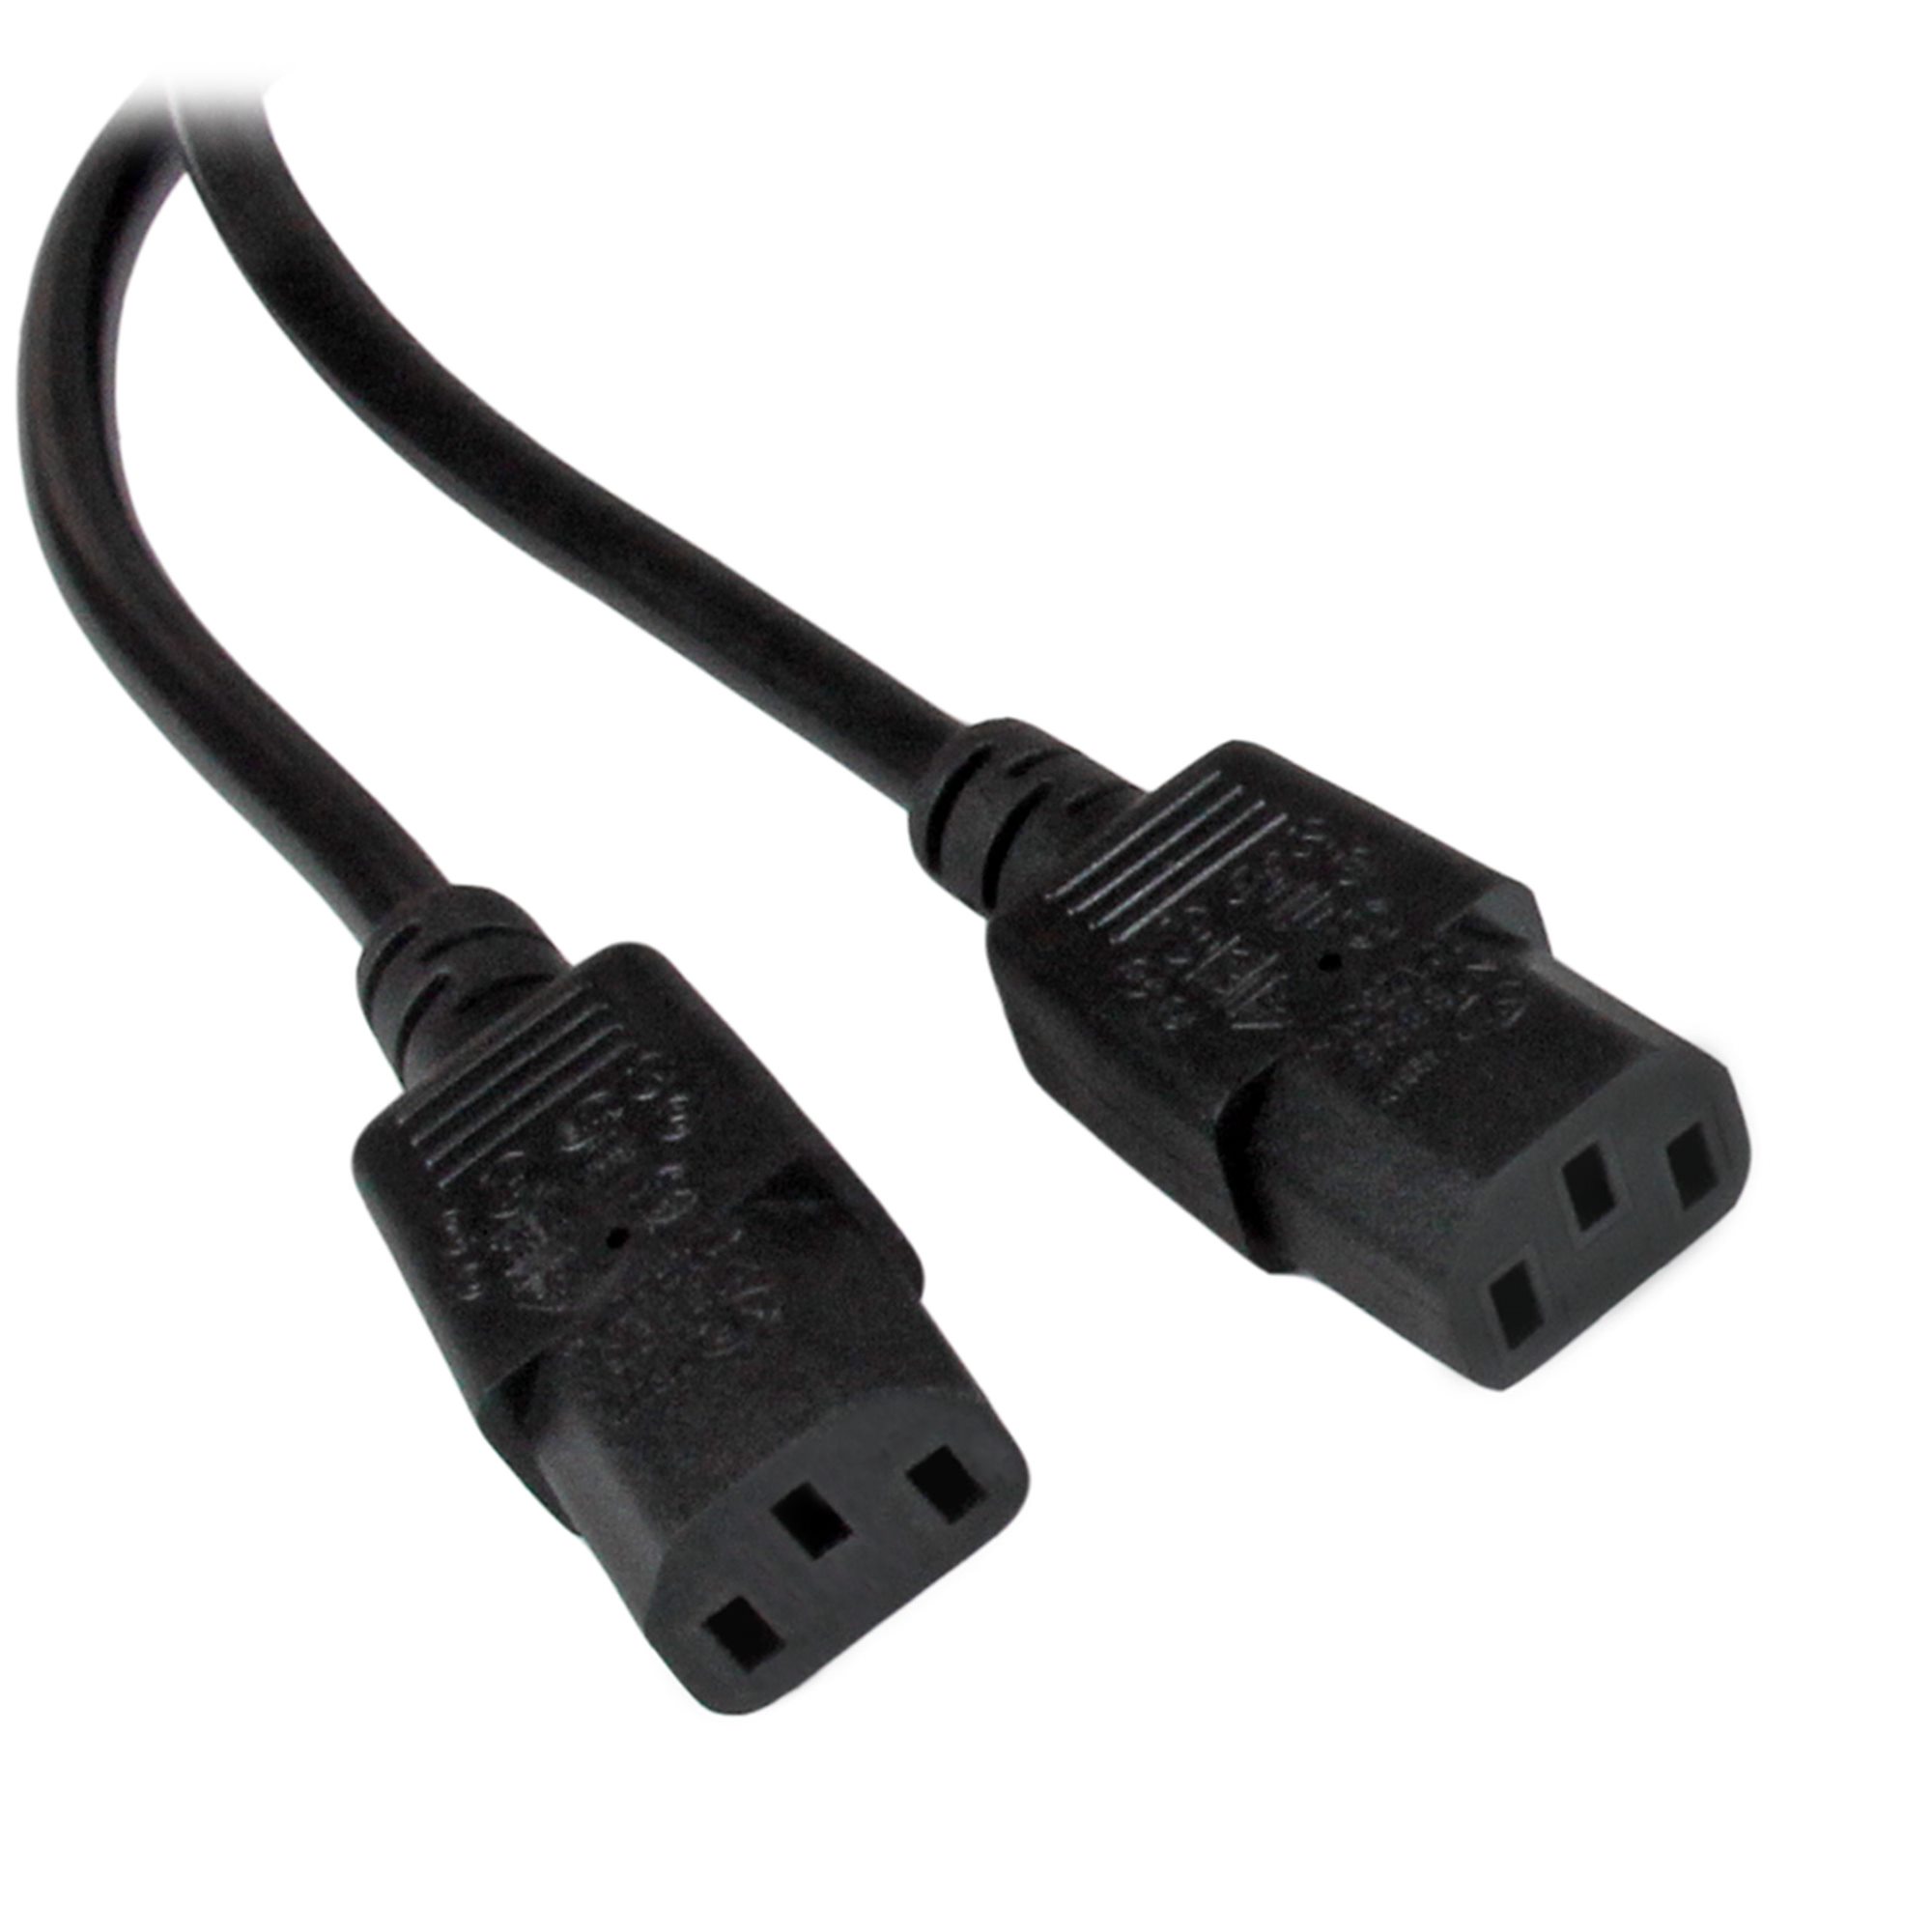 2m Mains Power Cable Bs 1363 To 2x C13 Computer Power Cables